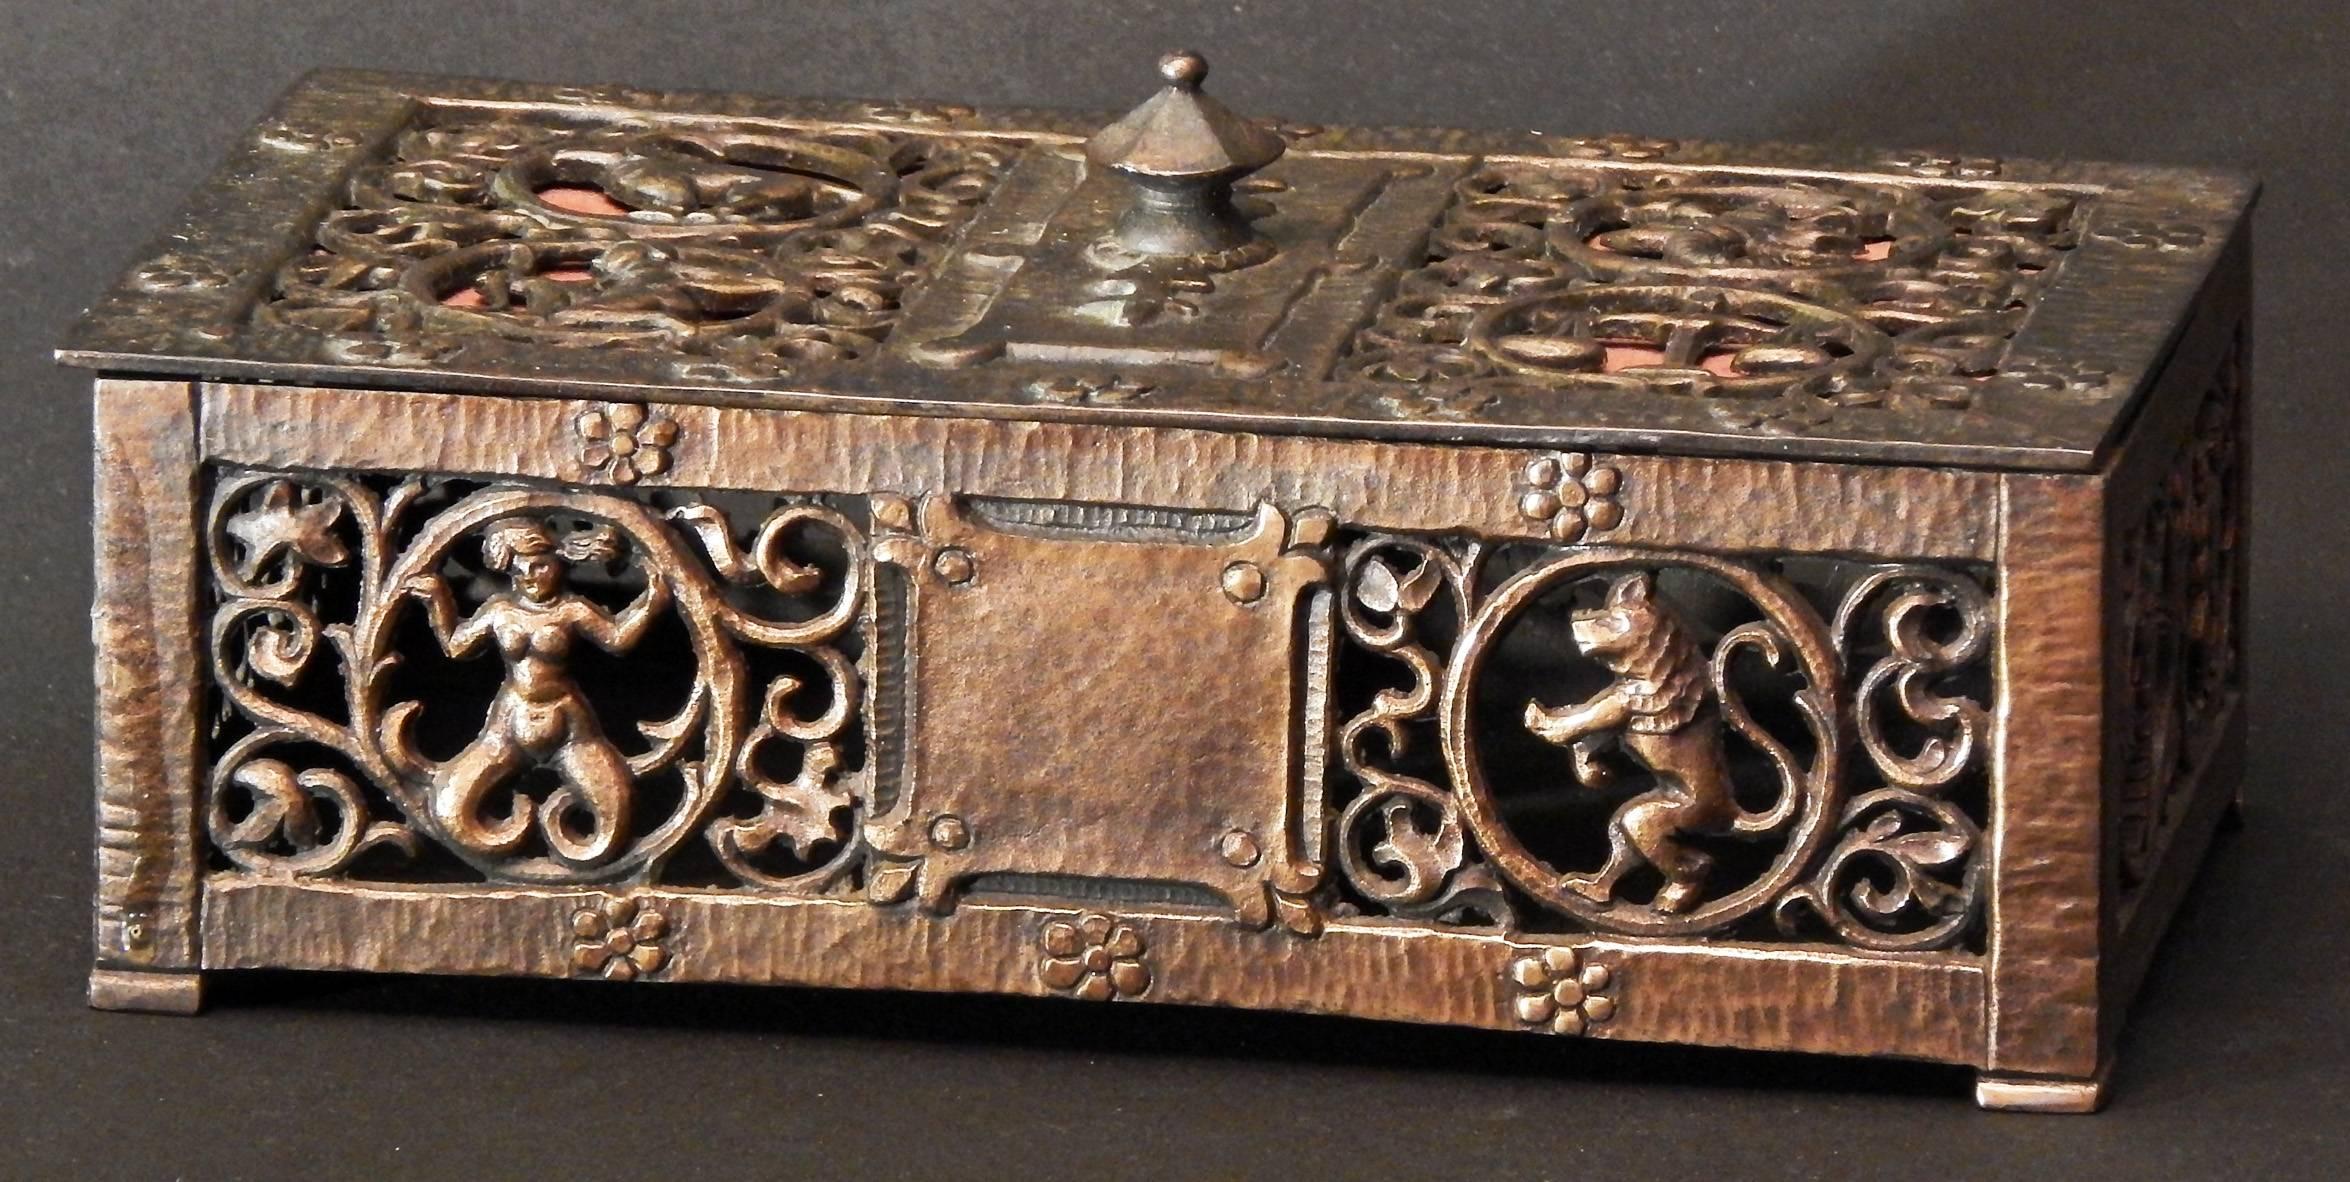 Beautifully cast and finished with a lovely, lustrous patina, this bronze lidded box depicts all 12 of the Zodiac symbols -- four on the lid and two on each of the four sides. The box was created by Oscar Bach, one of America's leading makers of